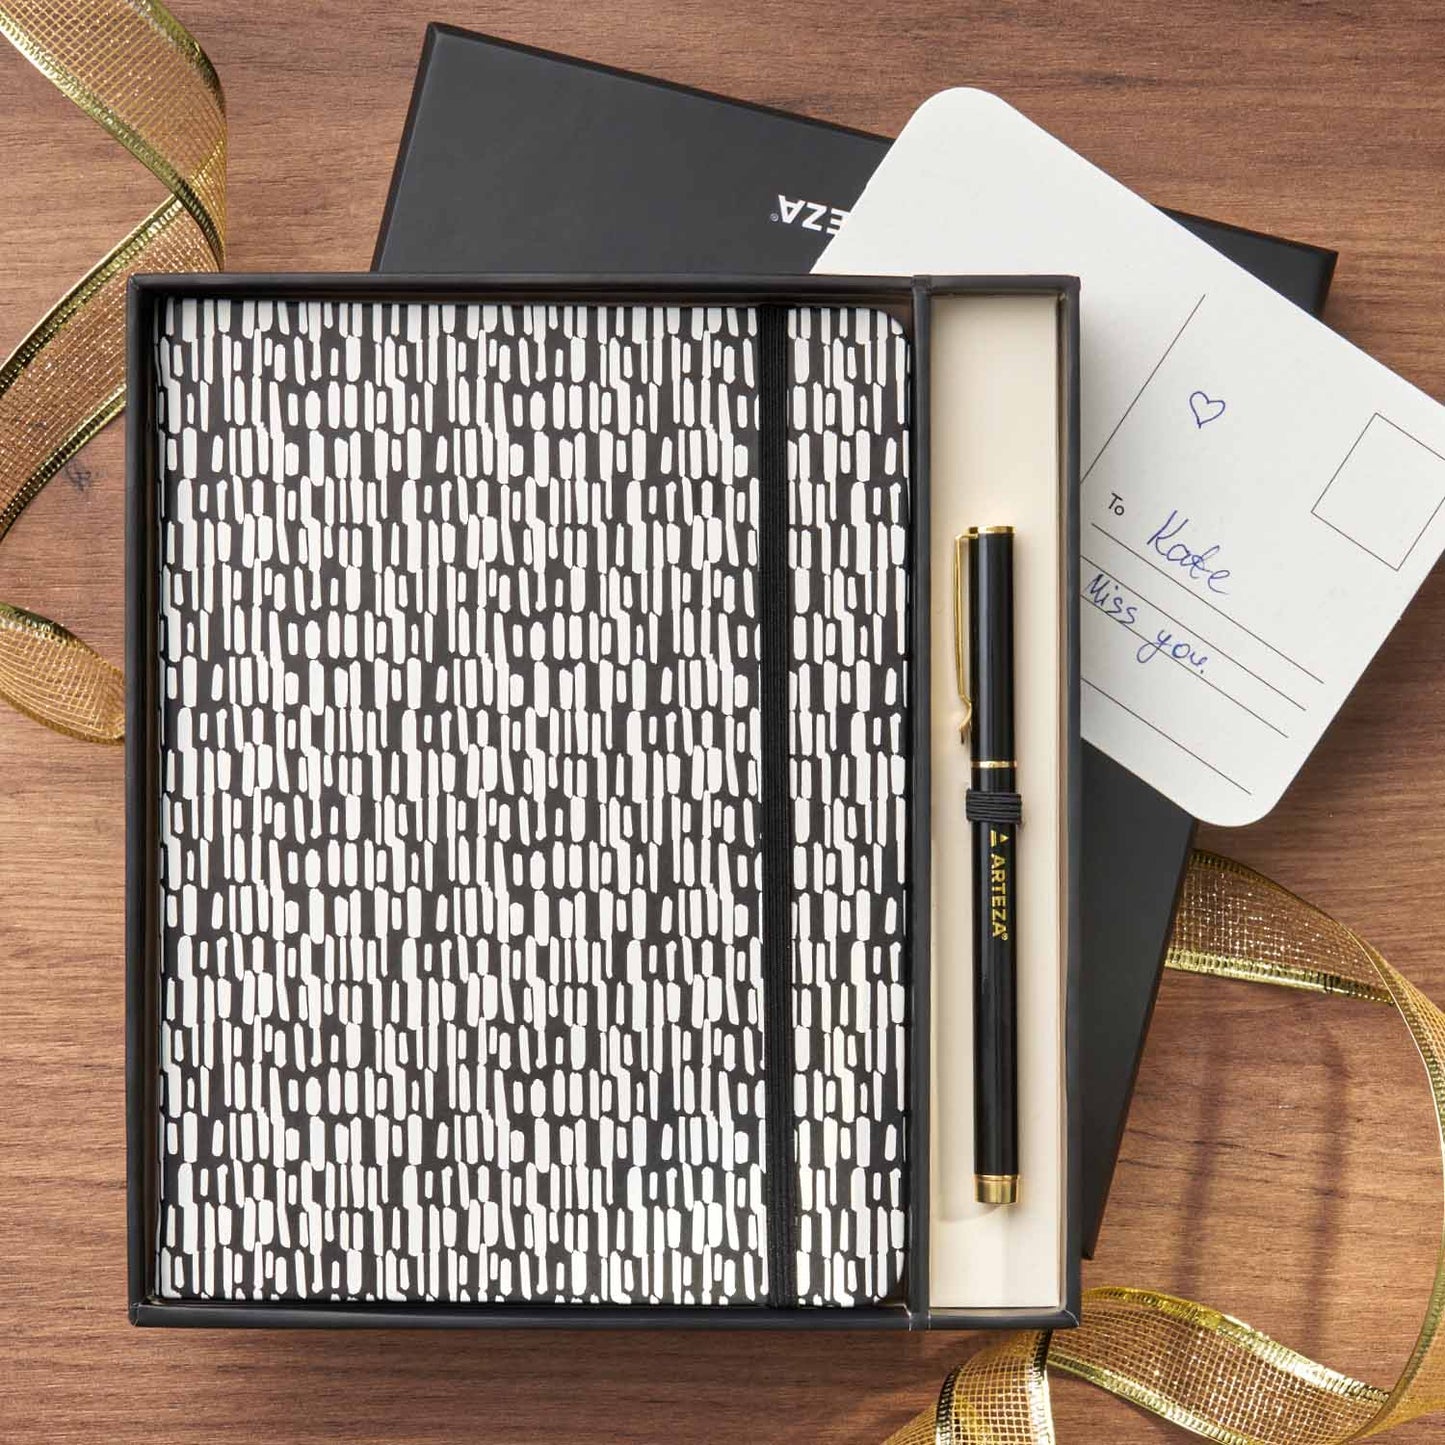 Arteza Journal Gift Set, 6 x 8 Inches, 96-Sheet Notebook with Double-Sided Lined Paper and 1 Black Ink Pen, Black and White Design, Office Supplies